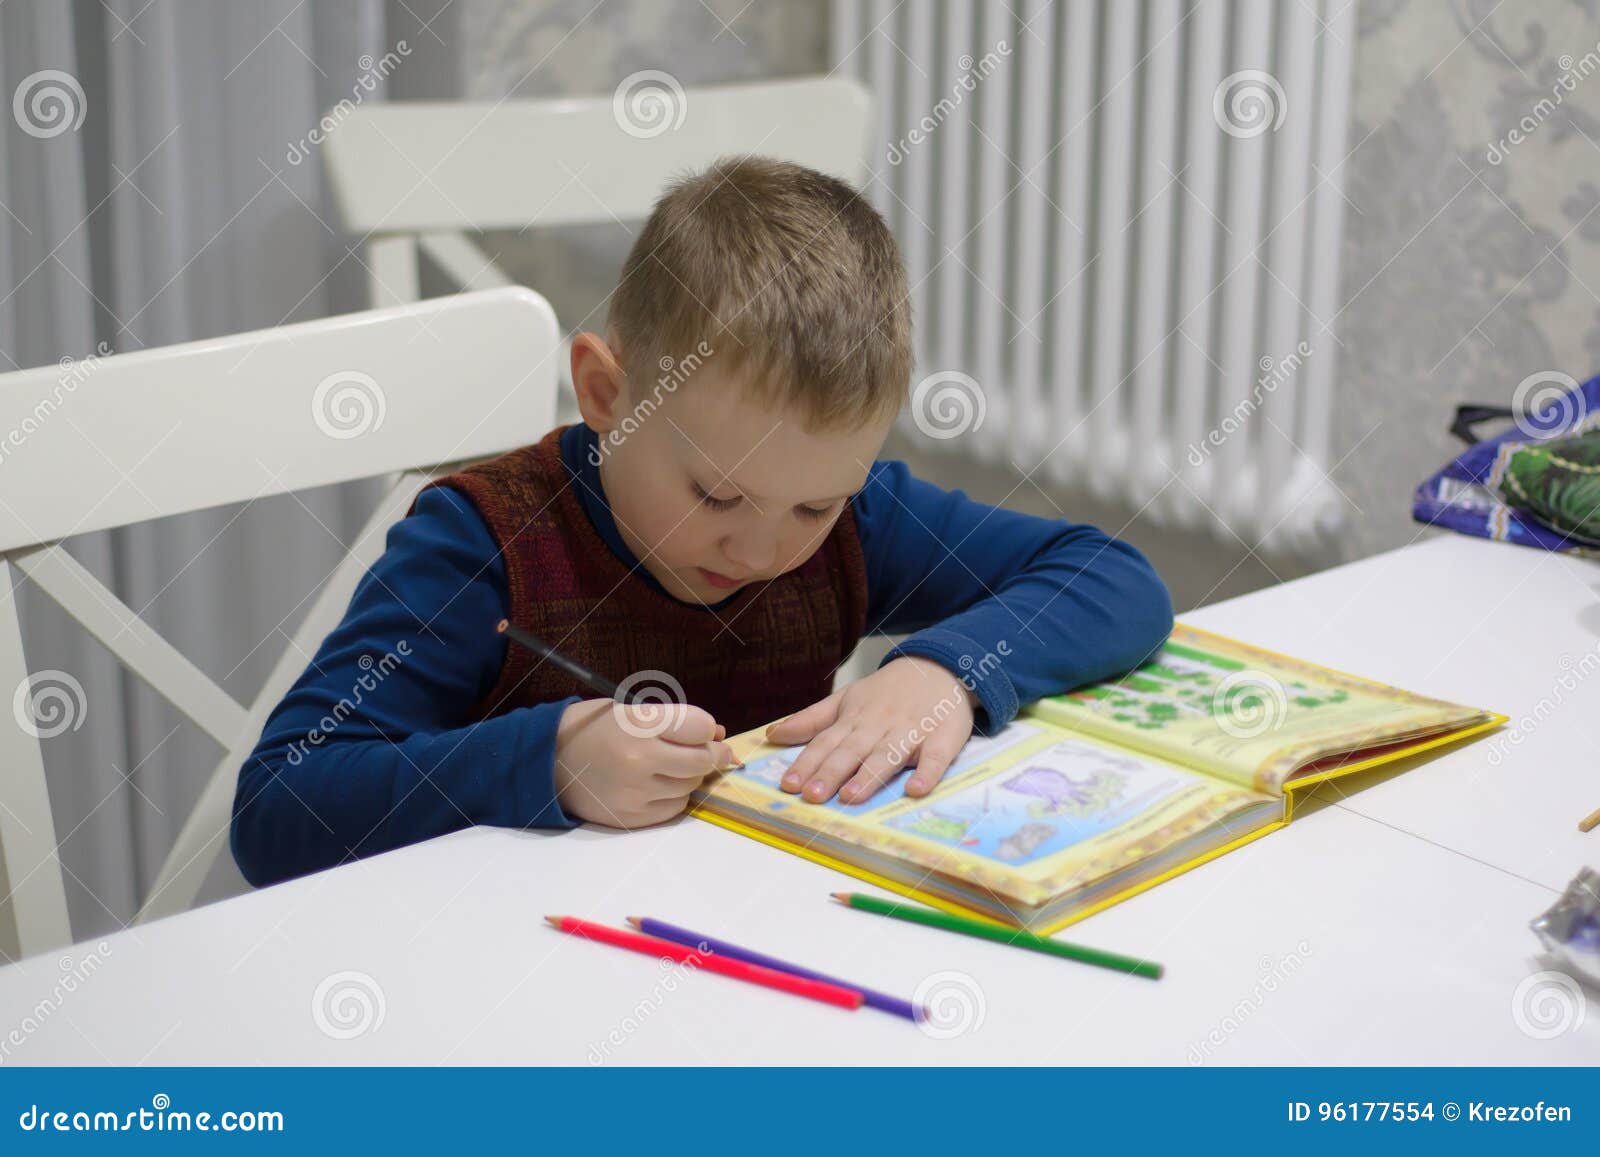 Boy reading a book. Boy sitting at a table and reading a book